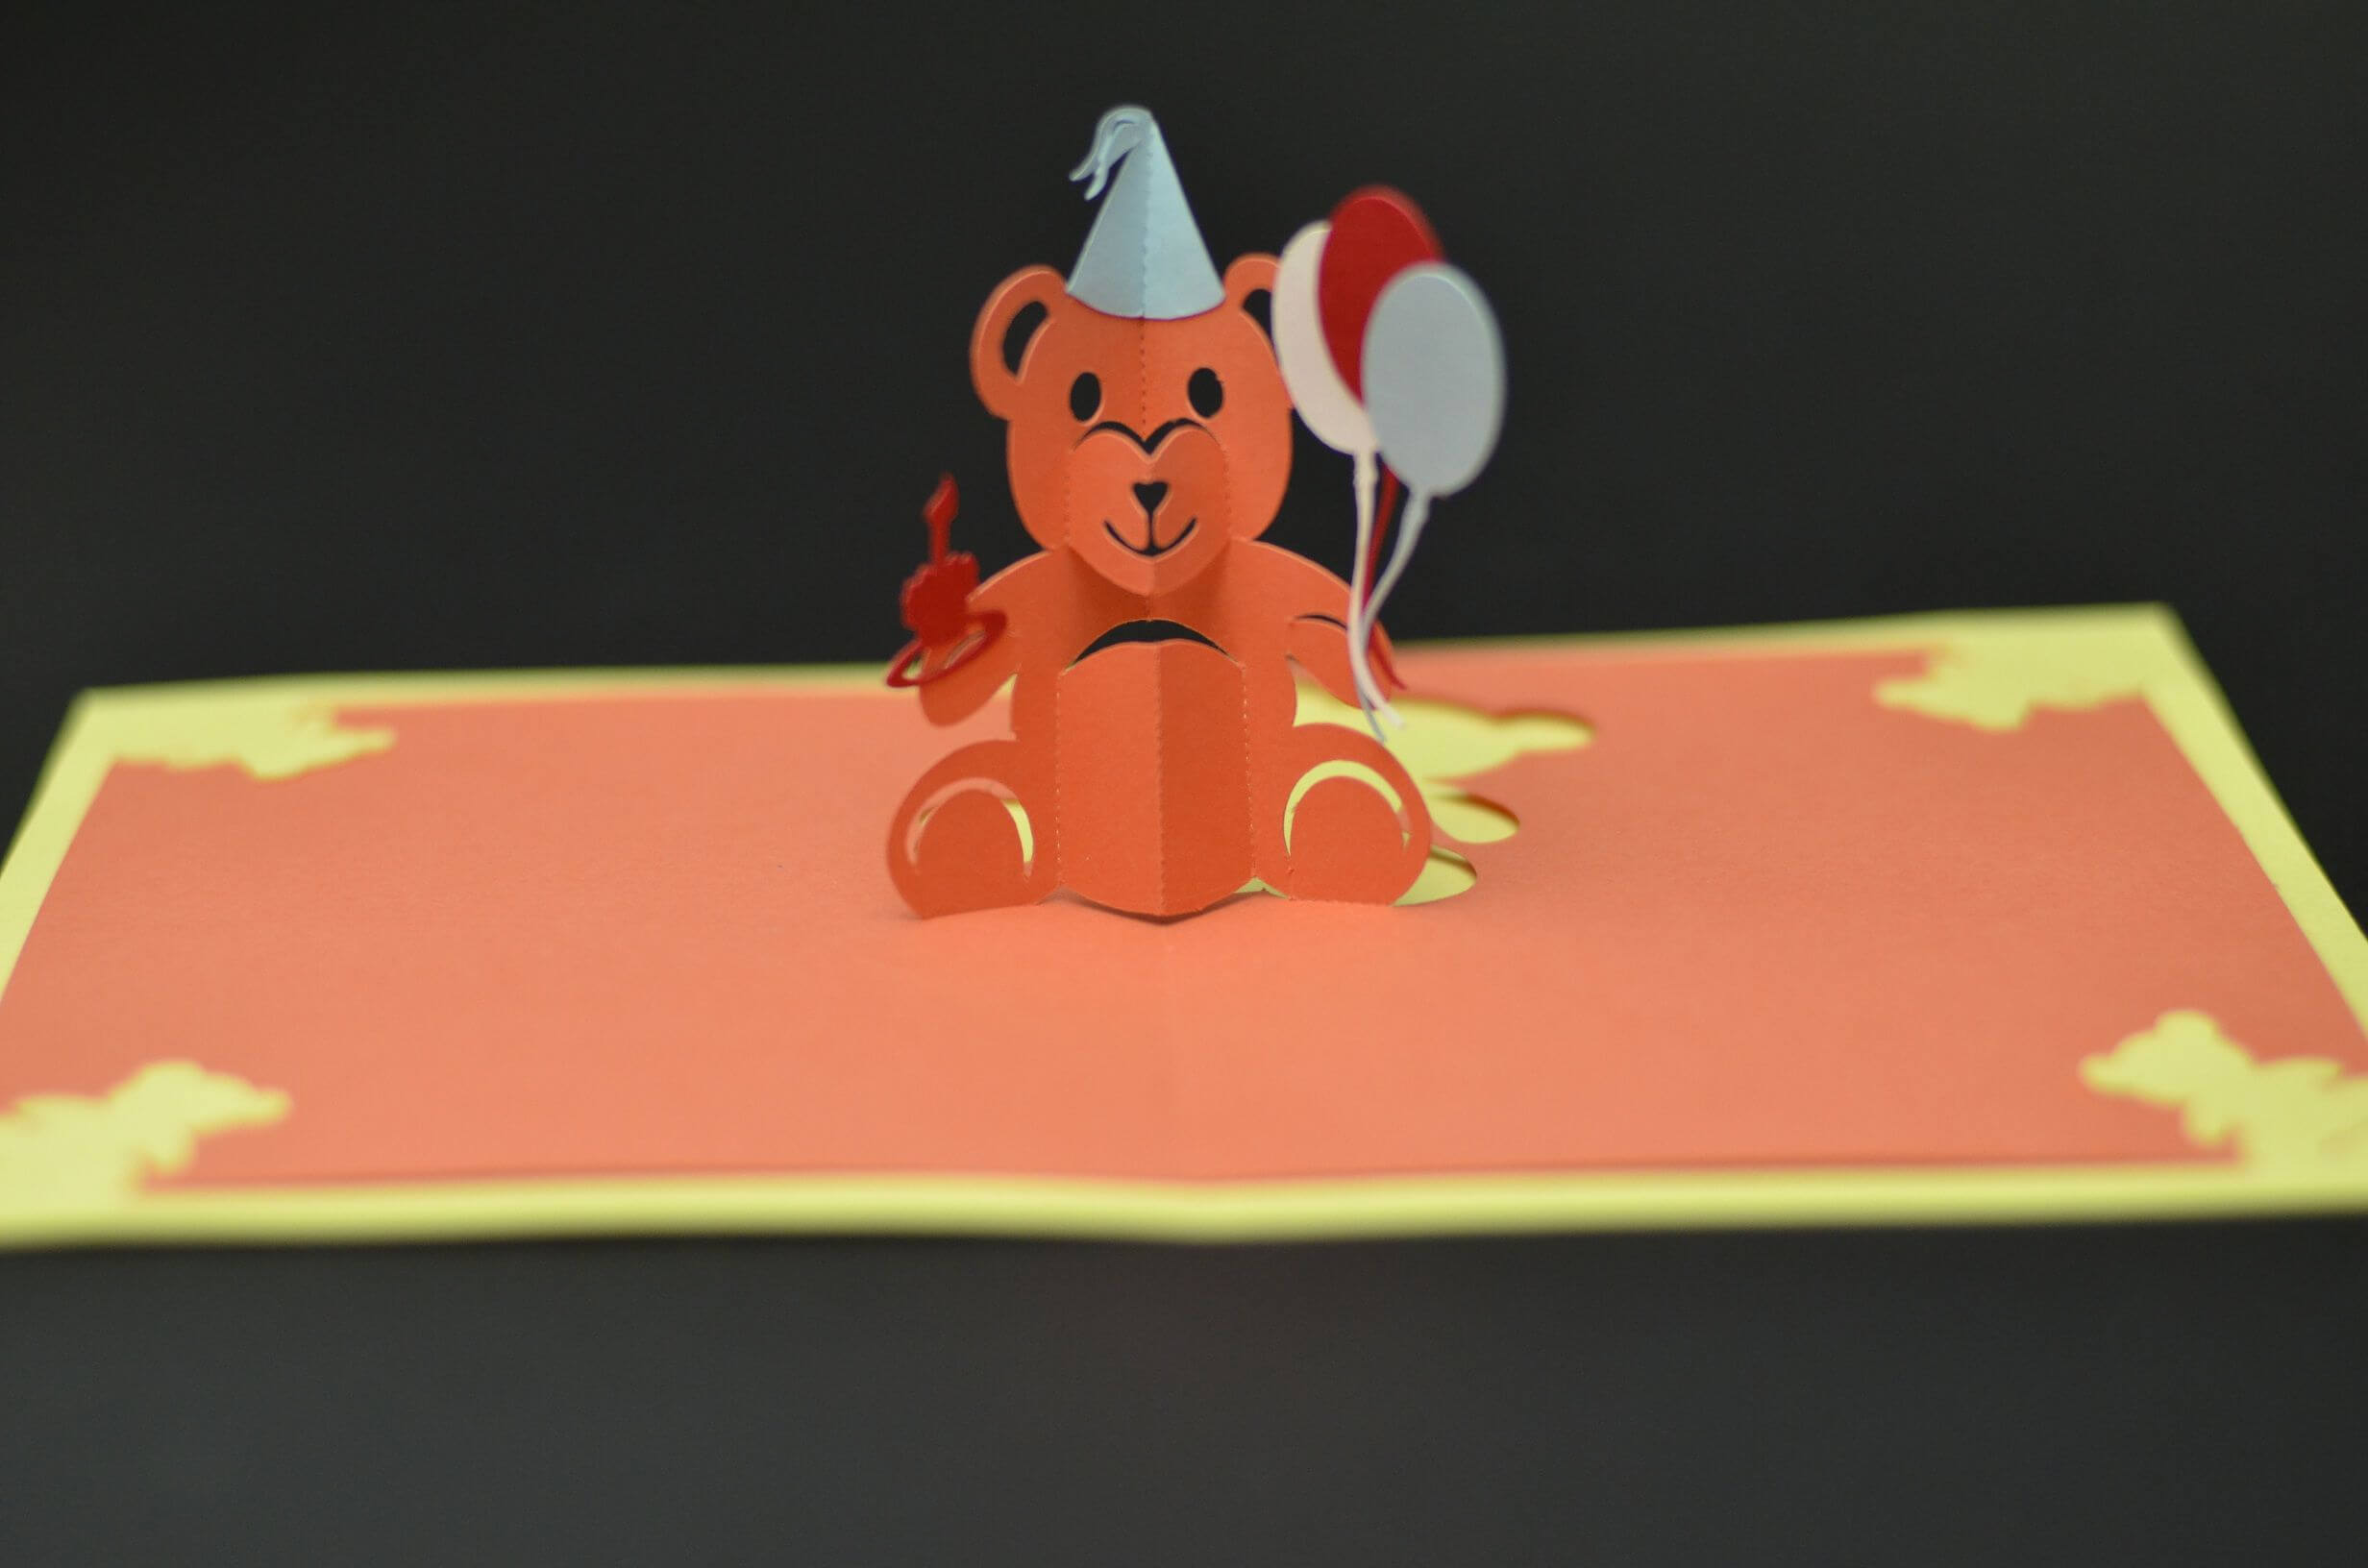 Teddy Bear Pop Up Card: Tutorial And Template | Pop Up Card Pertaining To Teddy Bear Pop Up Card Template Free